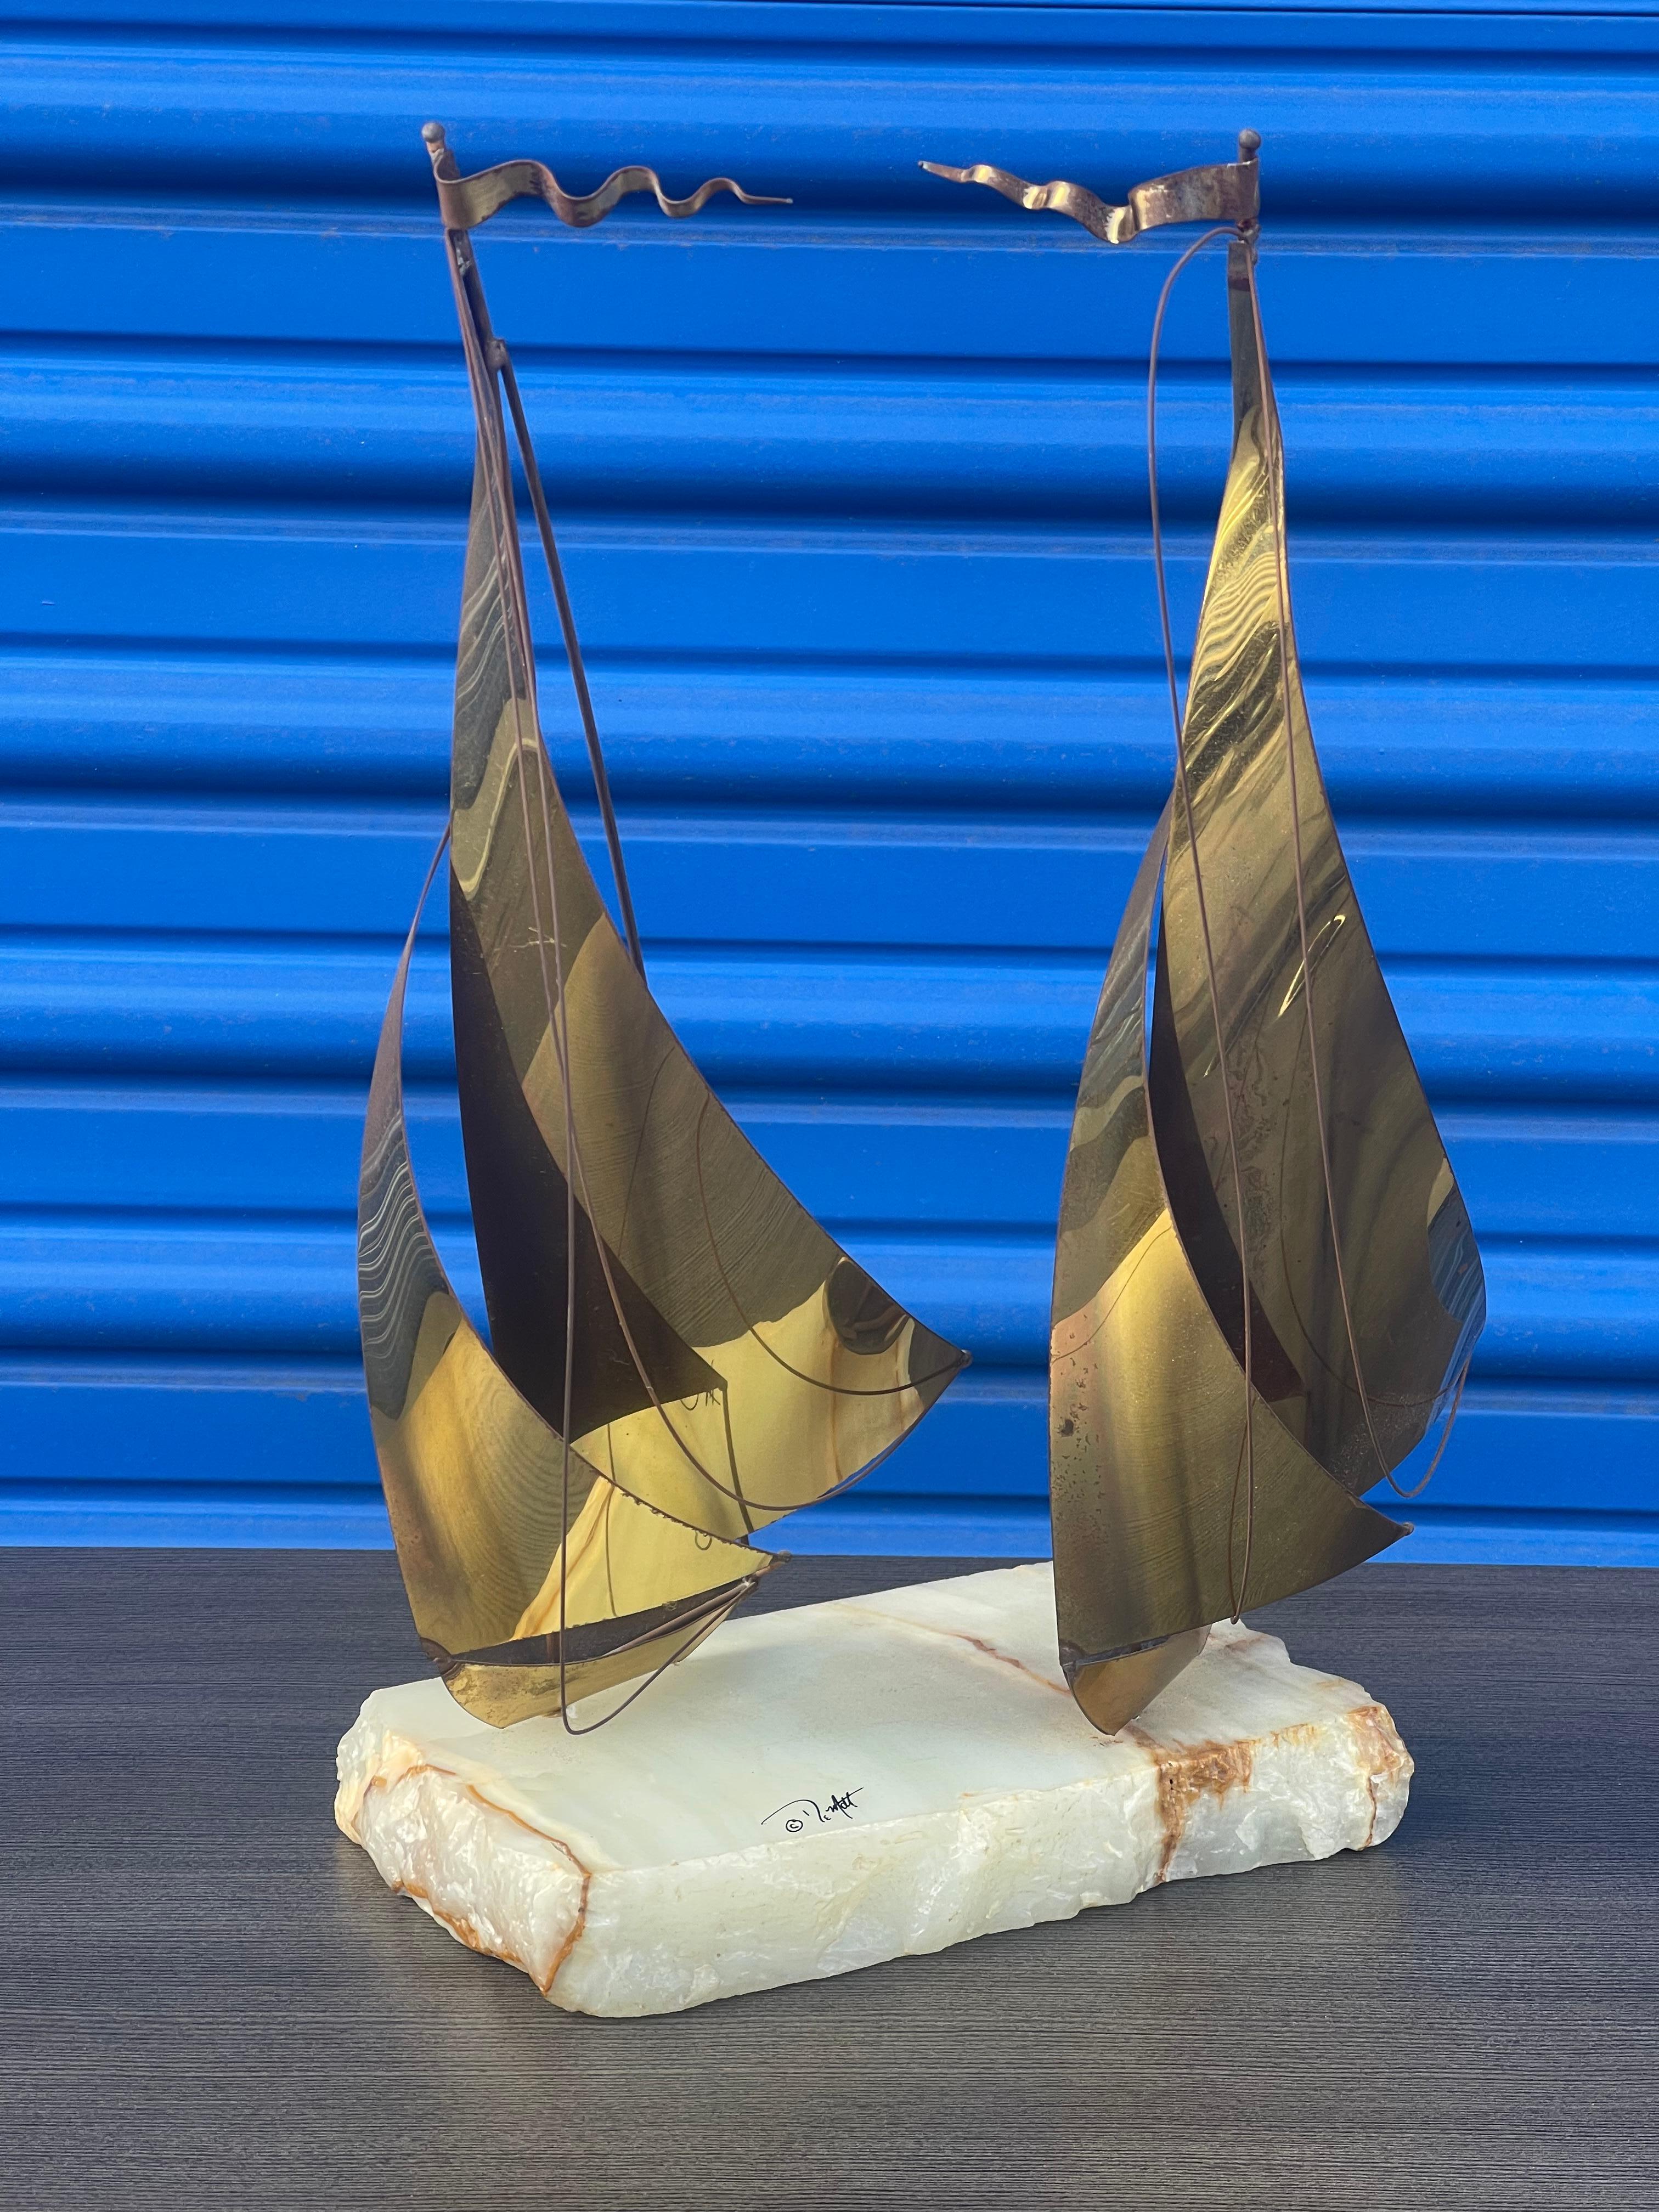 A really nice looking brass on quartz base dual sailboat sculpture by DeMoot, circa 1970s. The sculpture is in good vintage condition with a nice patina and measures 12